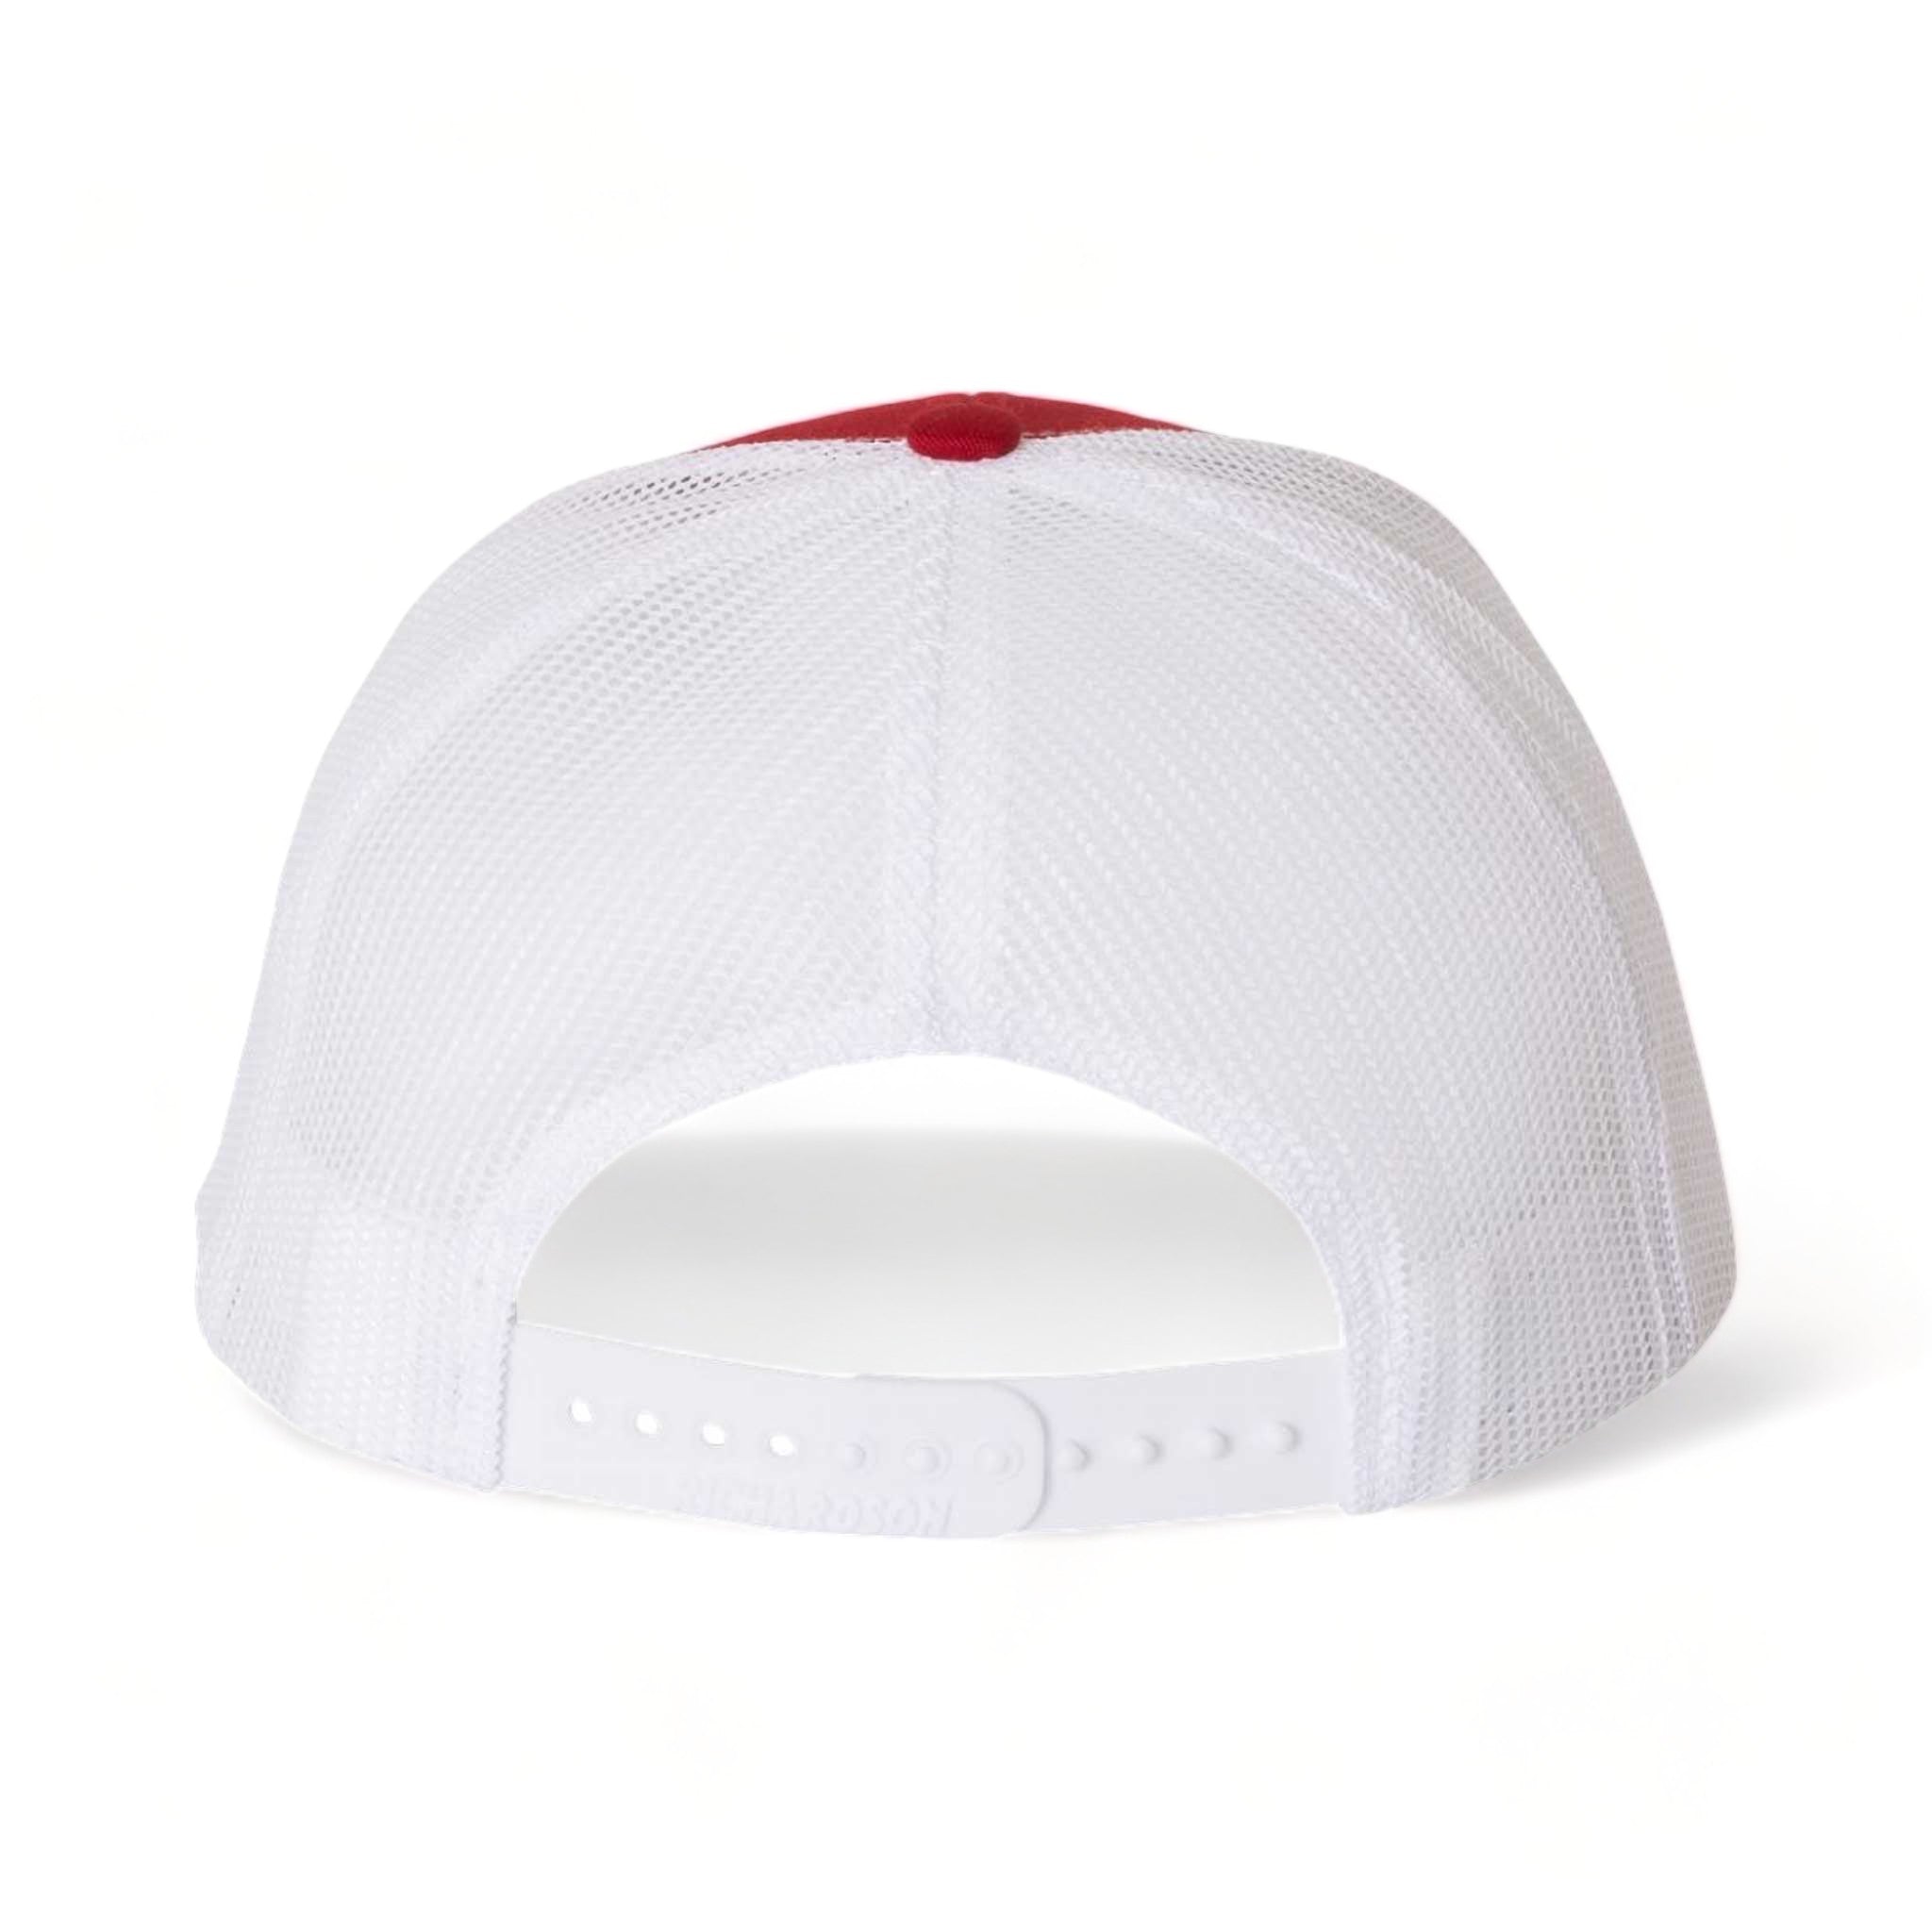 Back view of Richardson 112 custom hat in red and white